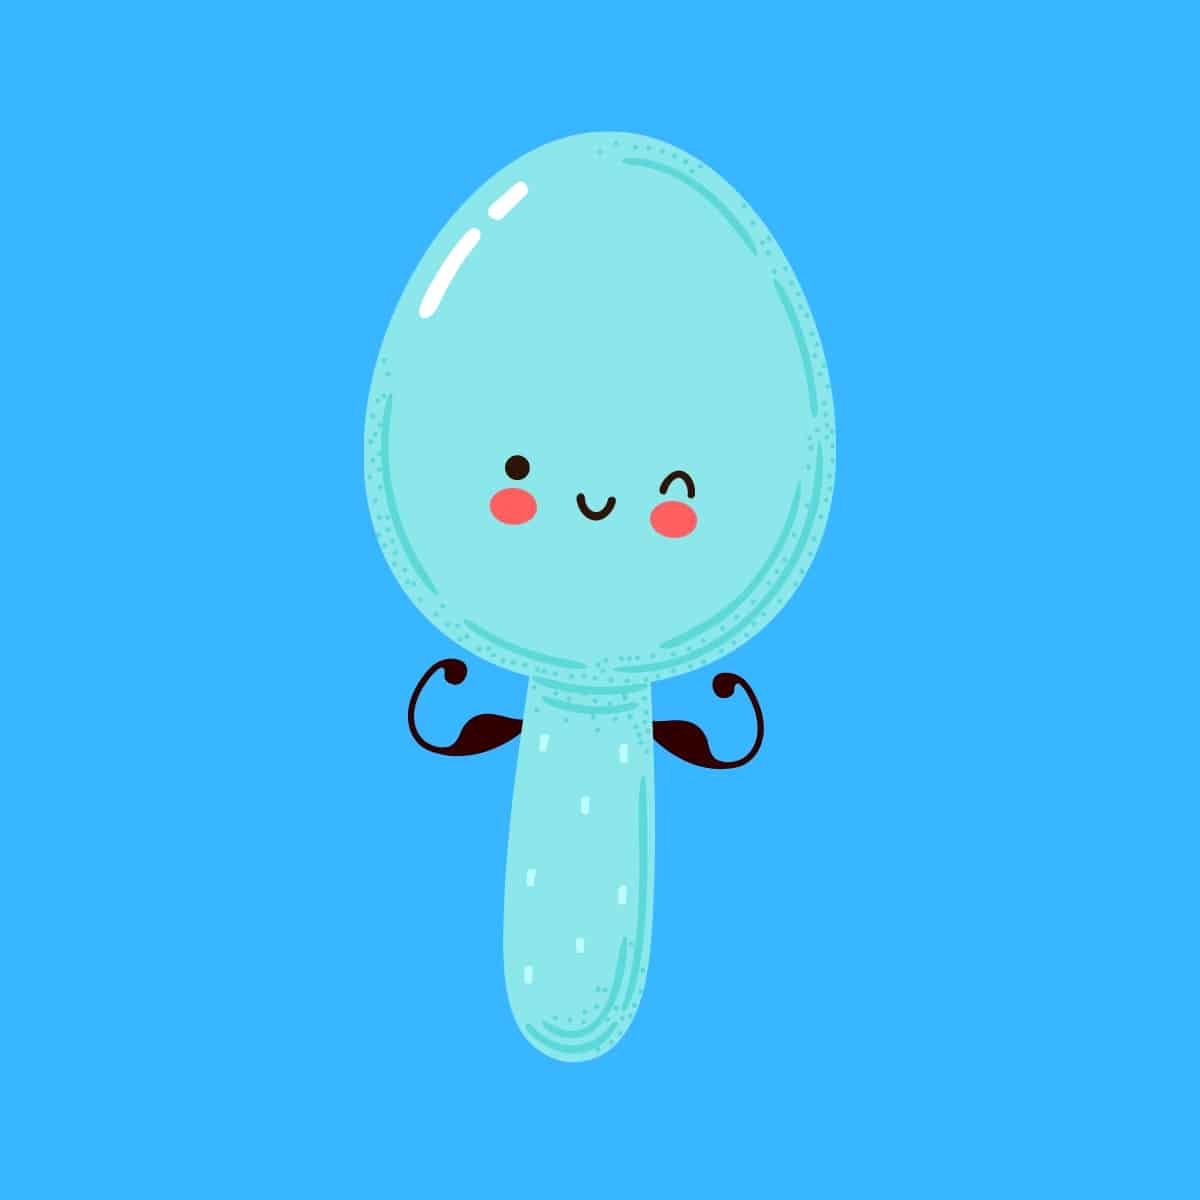 Cartoon graphic of a blue spoon winking and flexing its muscles arms on a blue background.